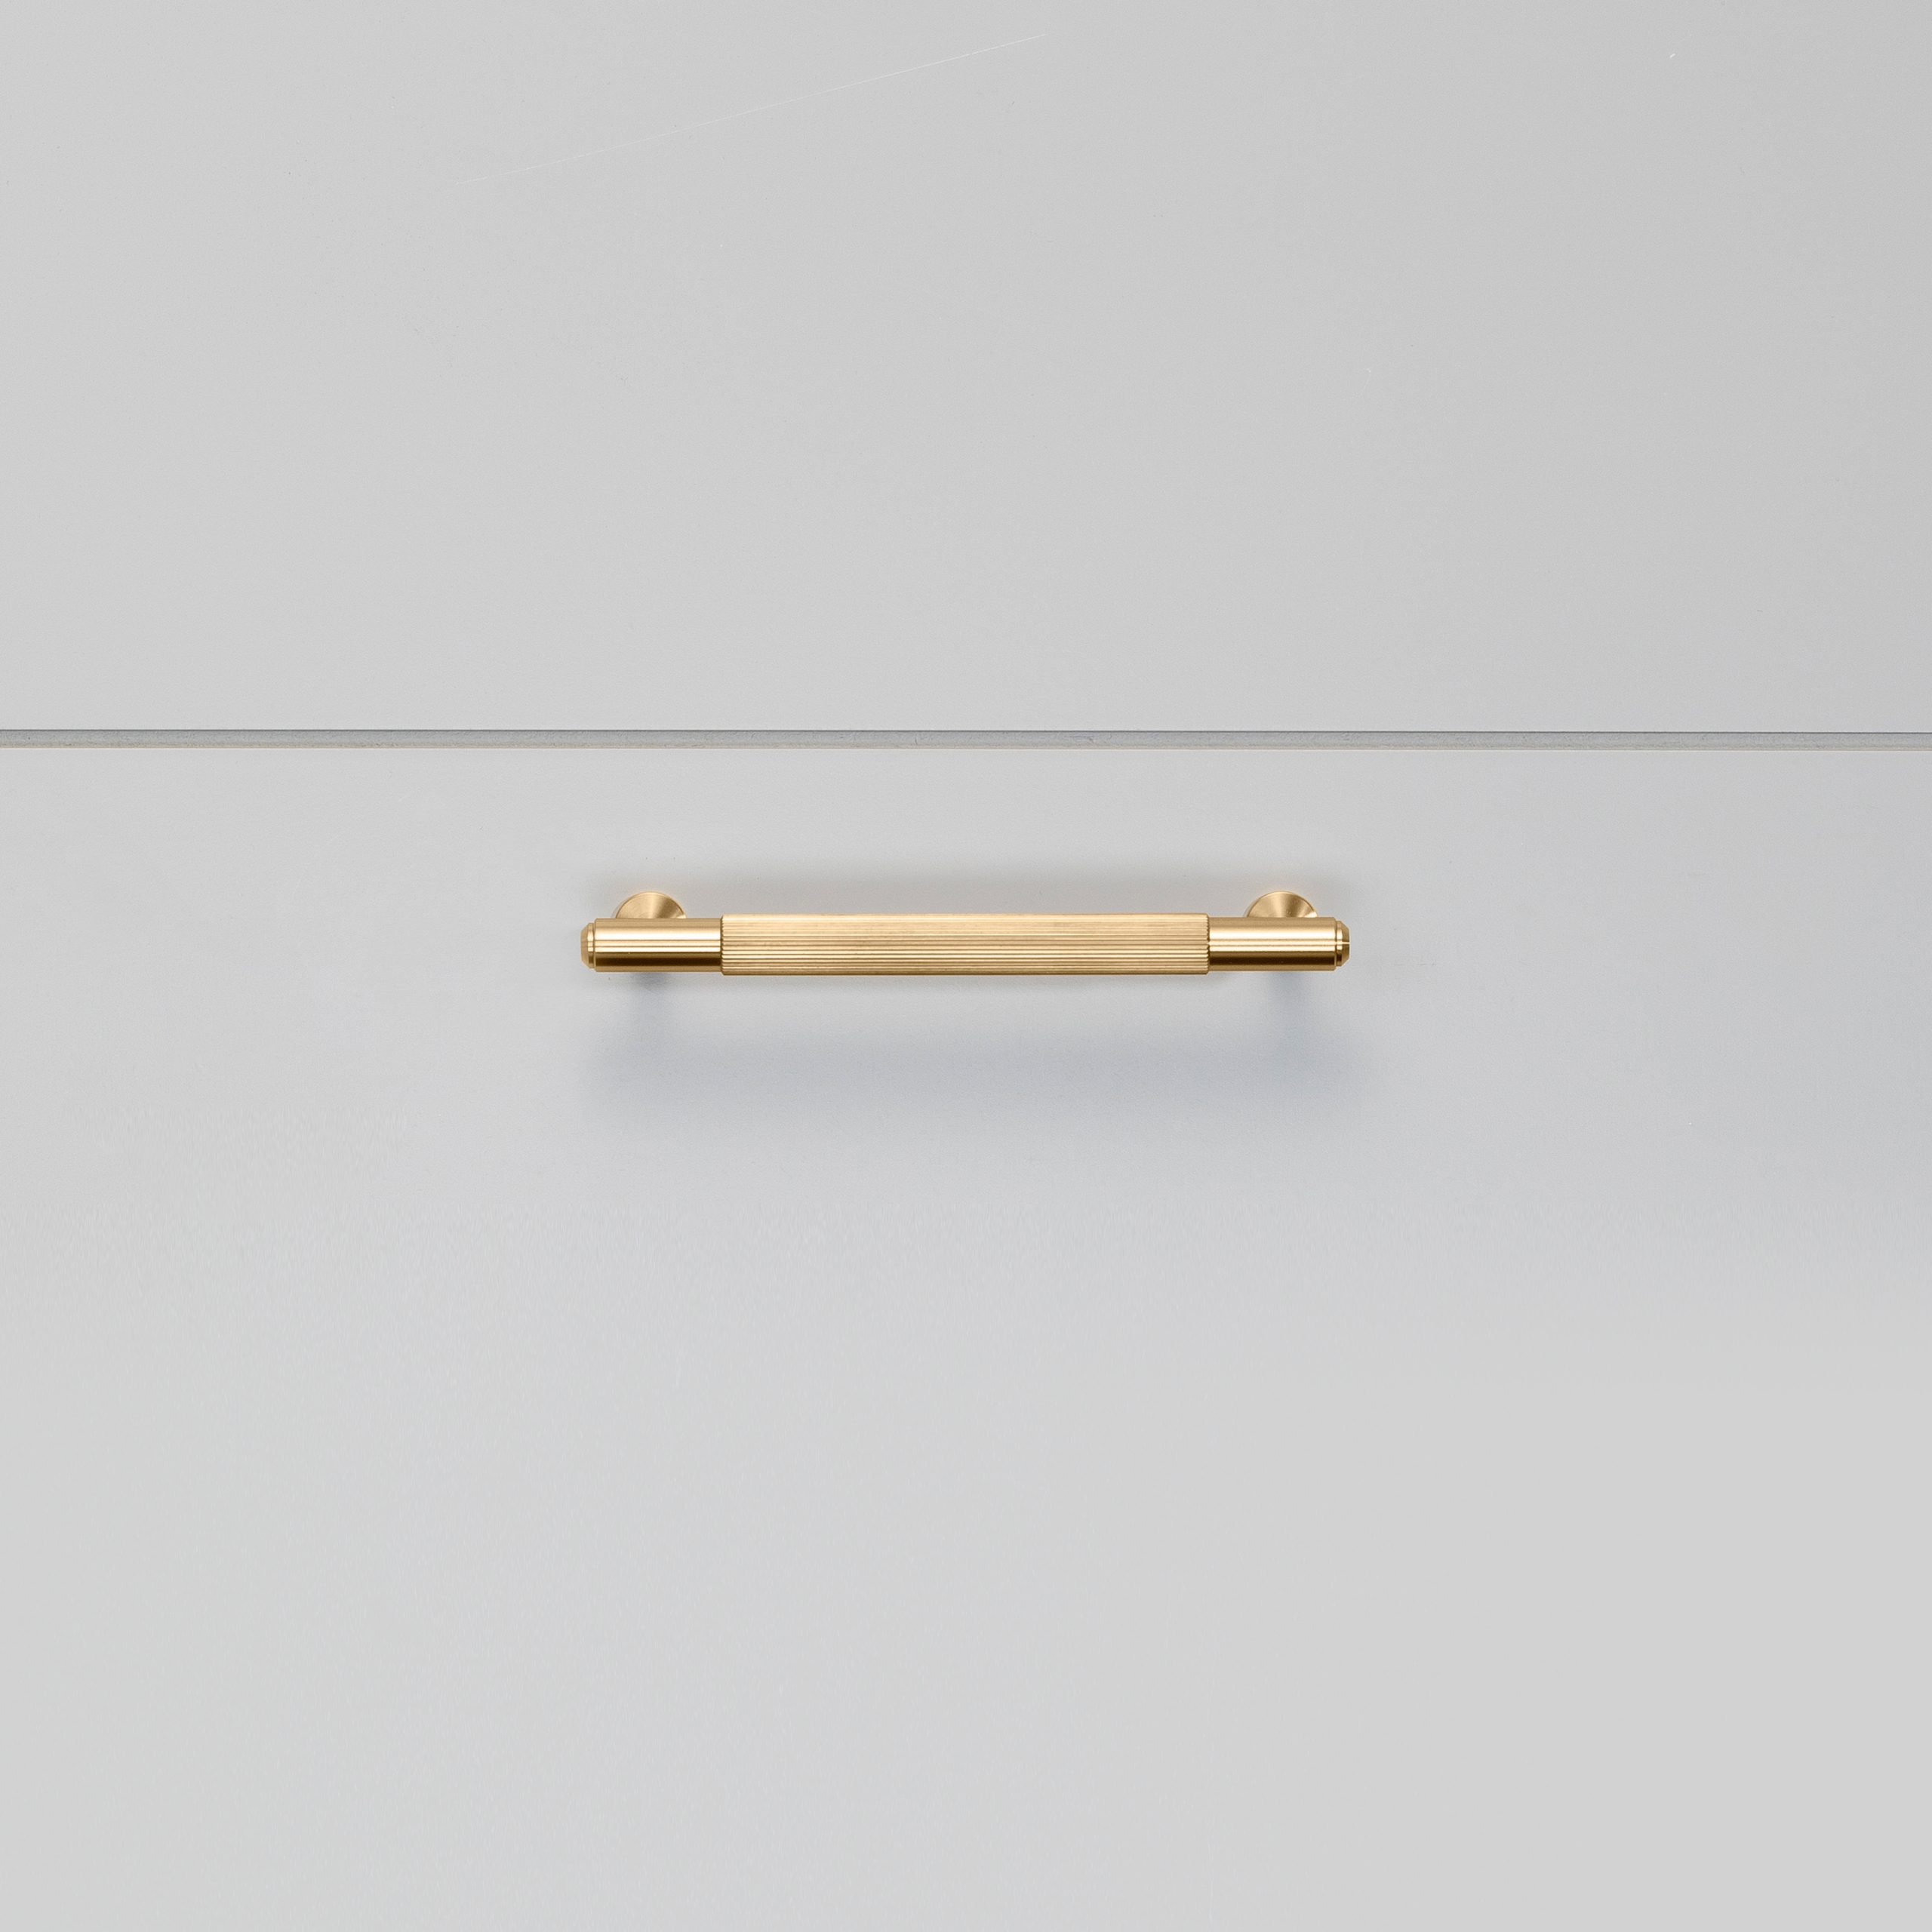 https://www.busterandpunch.com/us/wp-content/uploads/sites/2/2020/05/2.BusterPunch_Pull_Bar_Small_Linear_Brass_Front-scaled.jpg